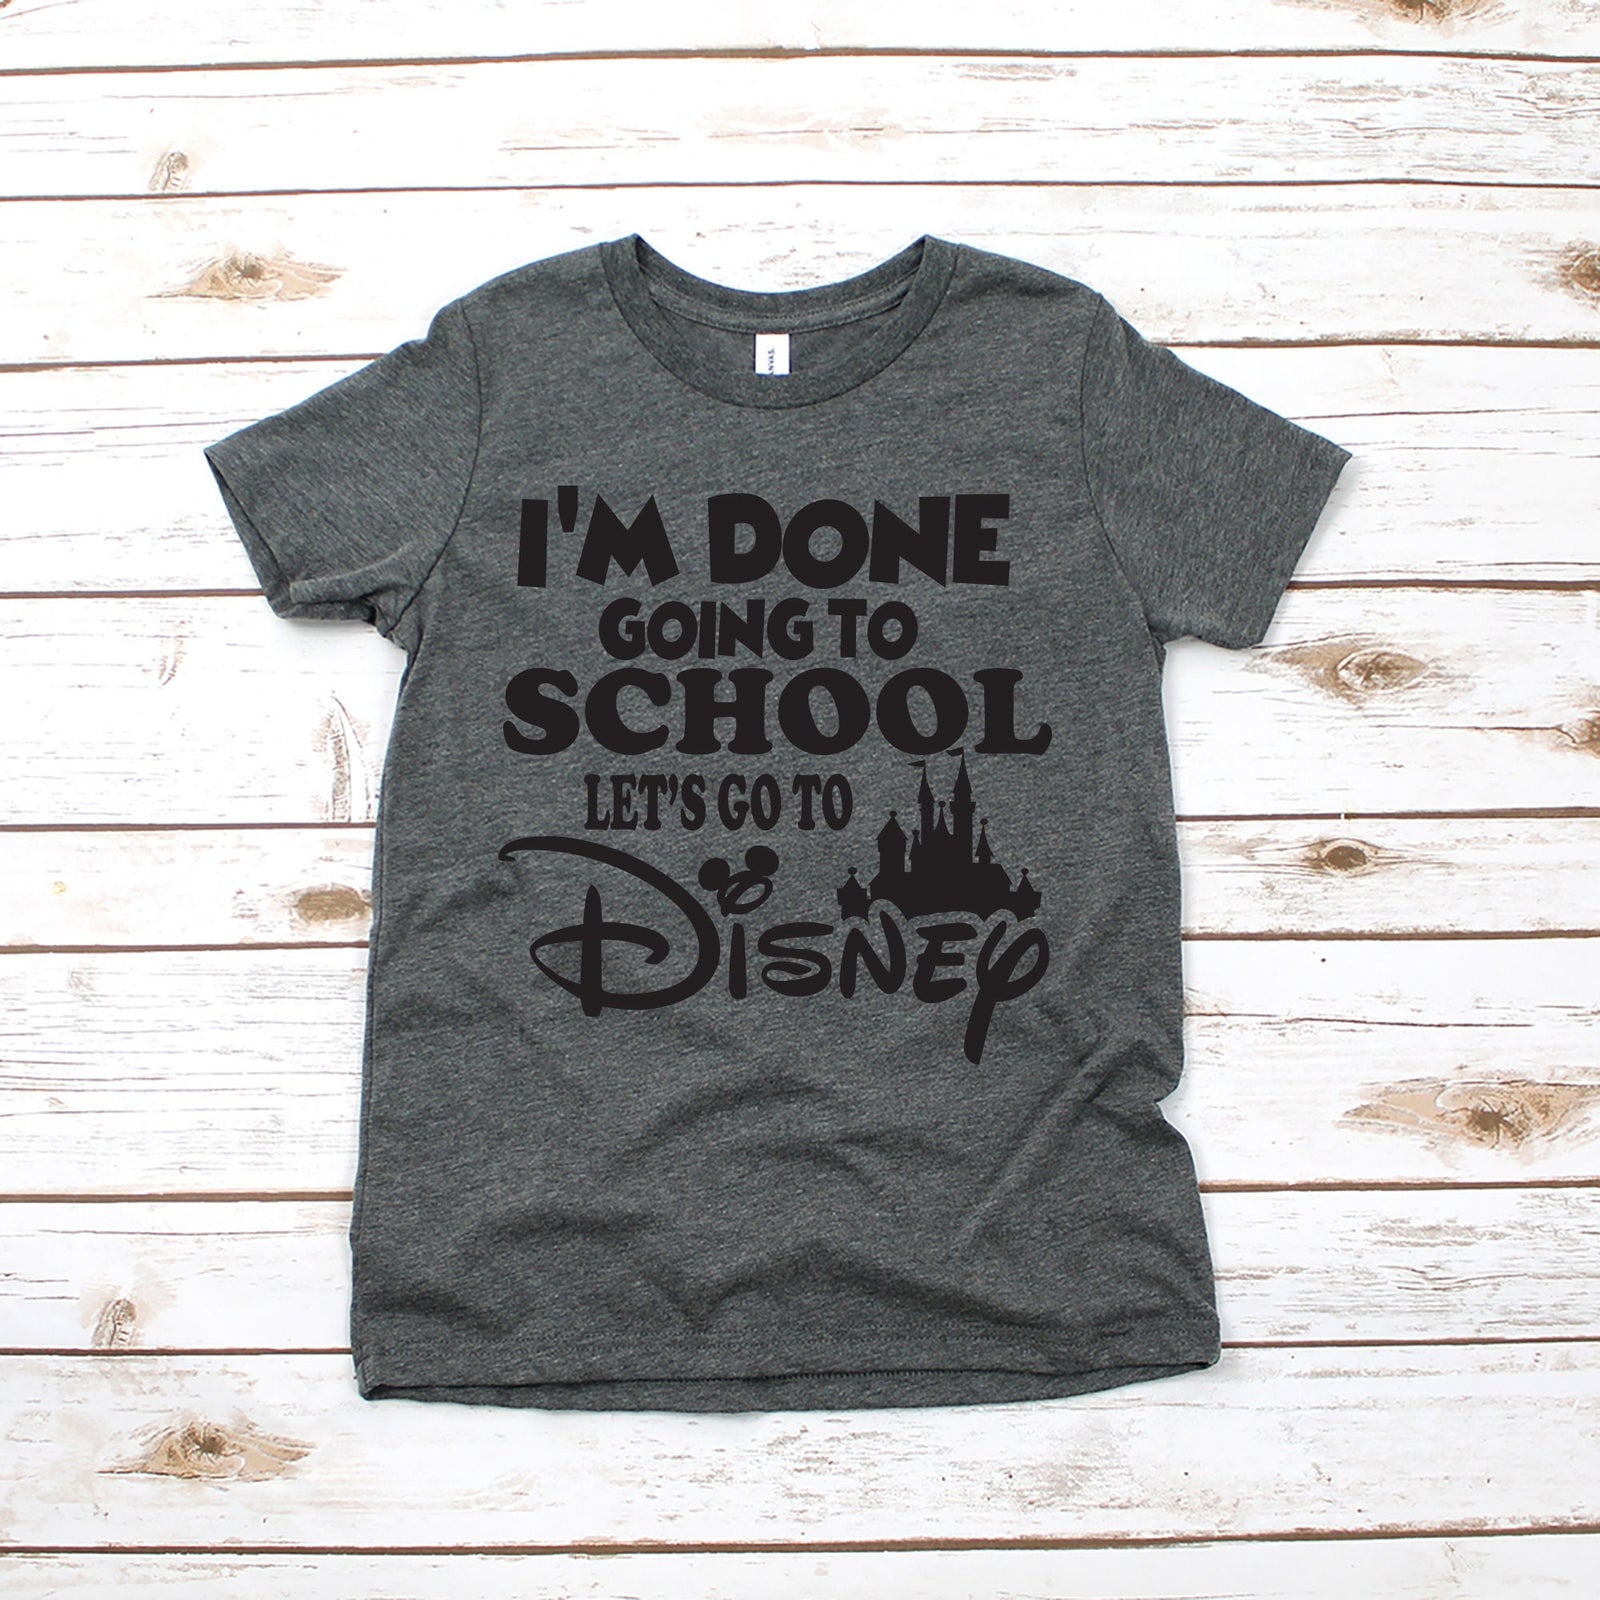 I'm Done Going to School Disney Kids Shirt - Infant Toddler & Youth Shirt -Let's Go to Disney